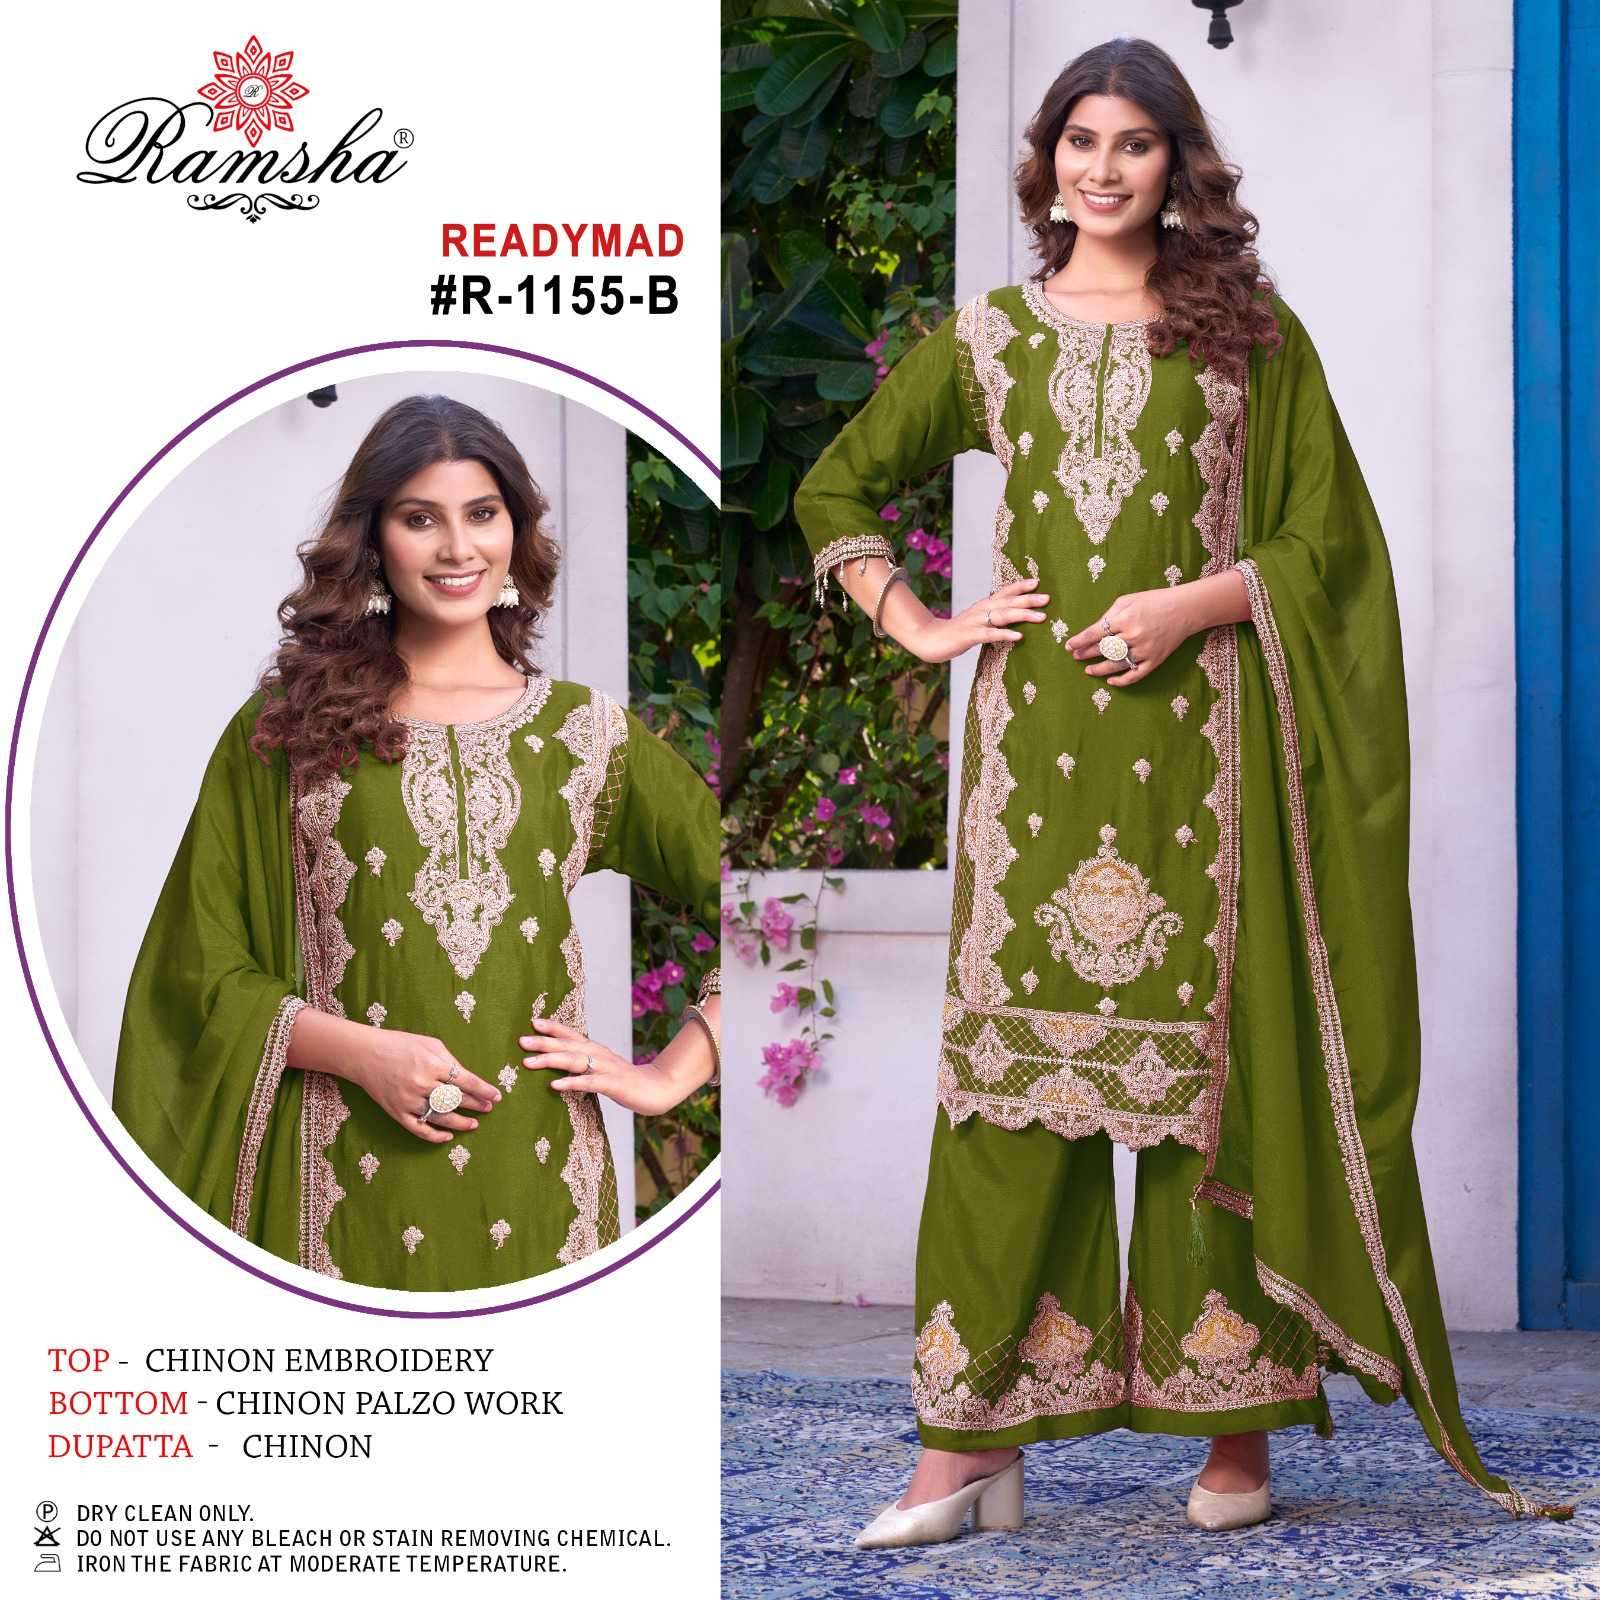 ramsha R-1155 chinon embroidery readymade suit 